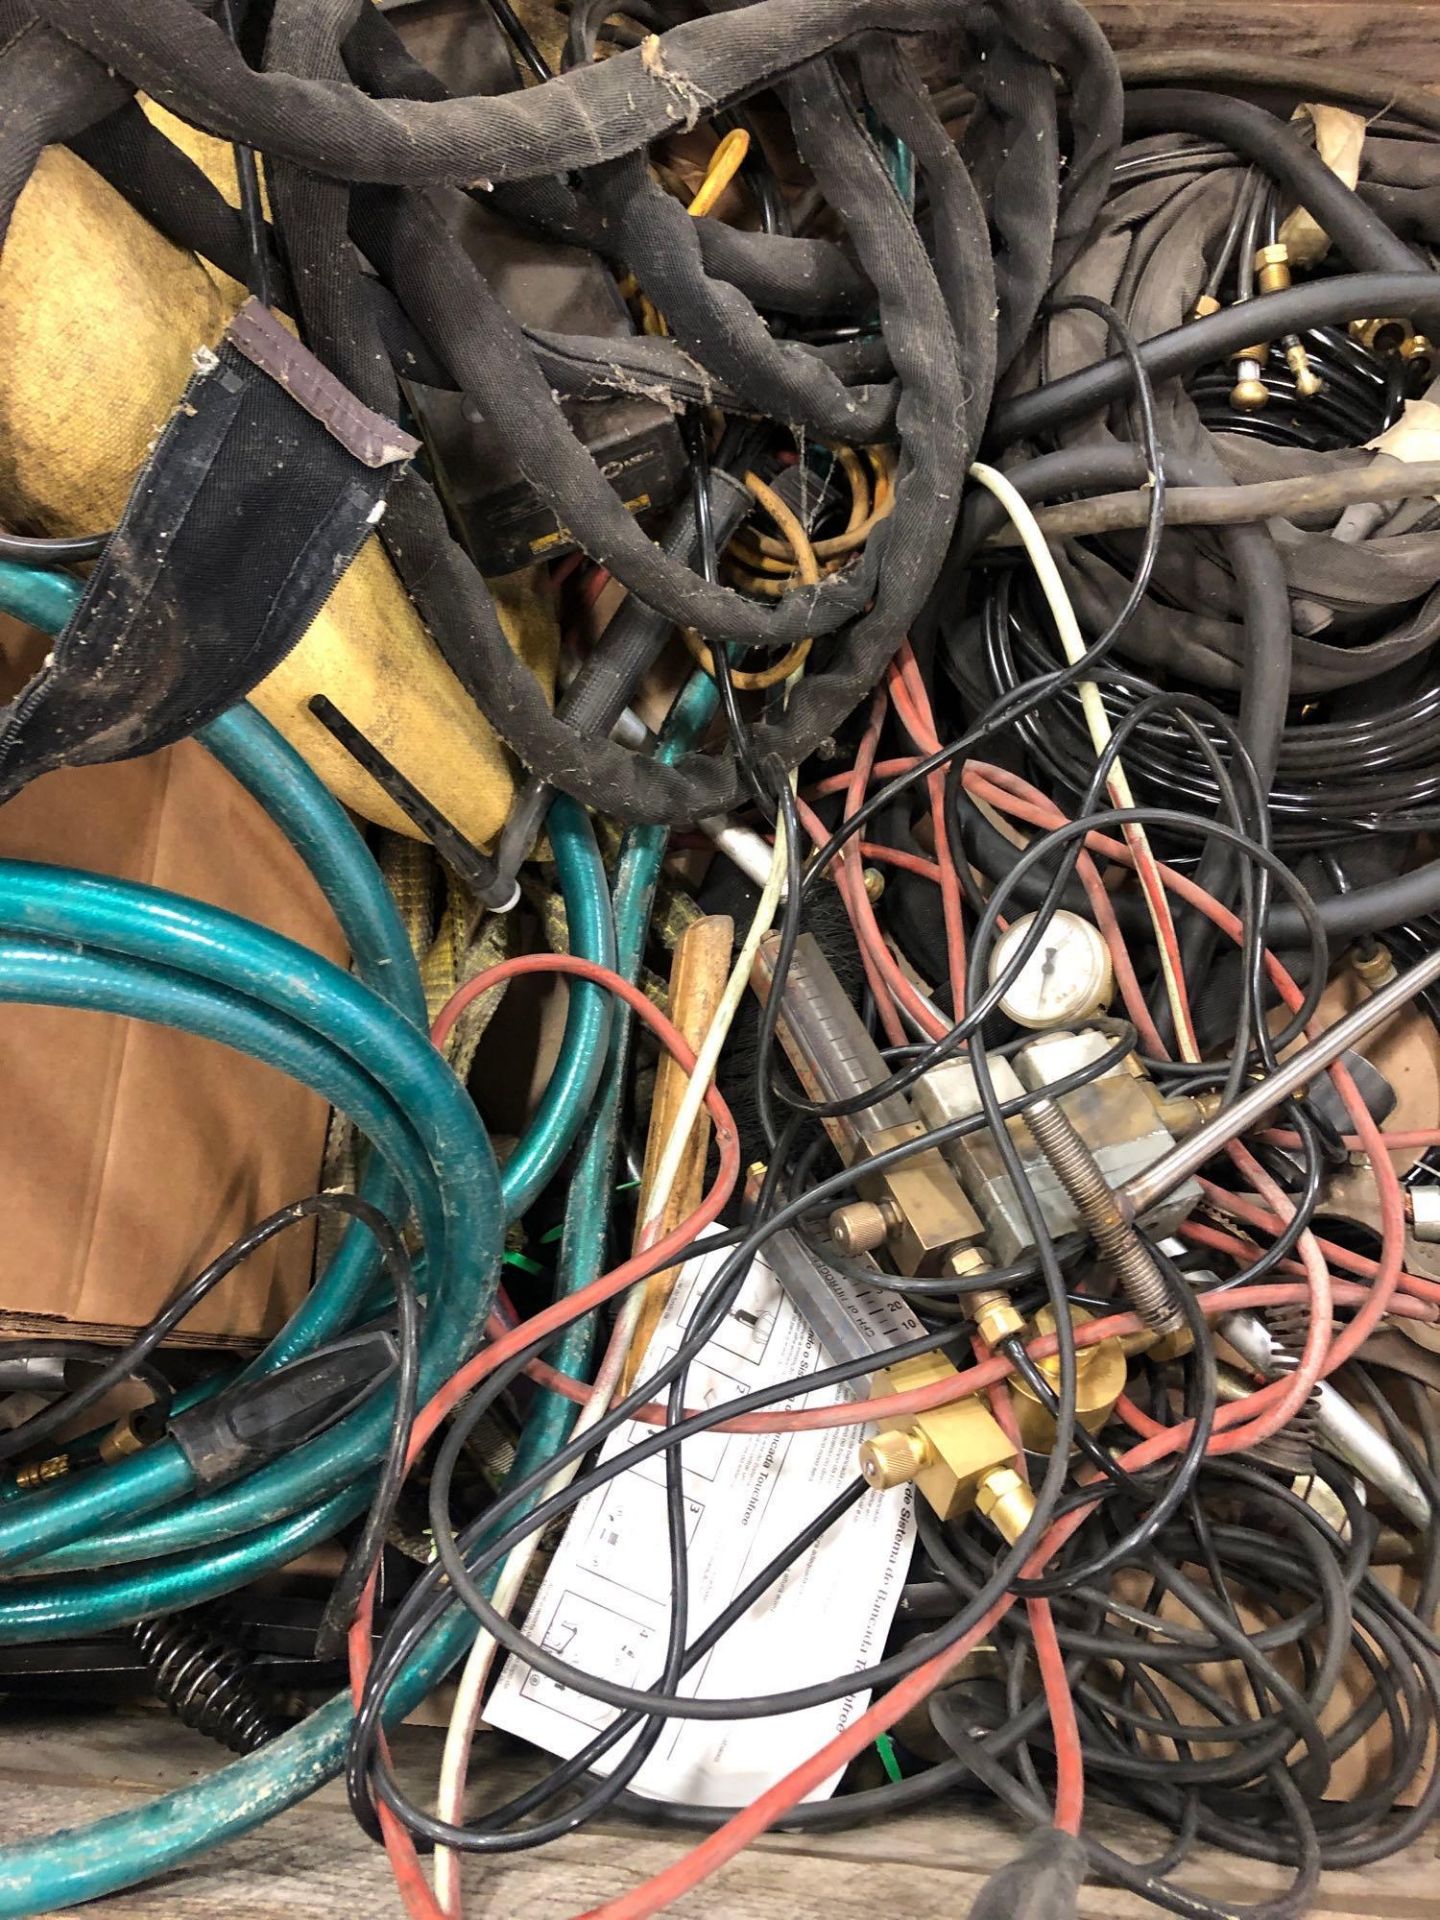 Lot of Welding Cables, meters, Face Shield & Misc Items - Image 4 of 5